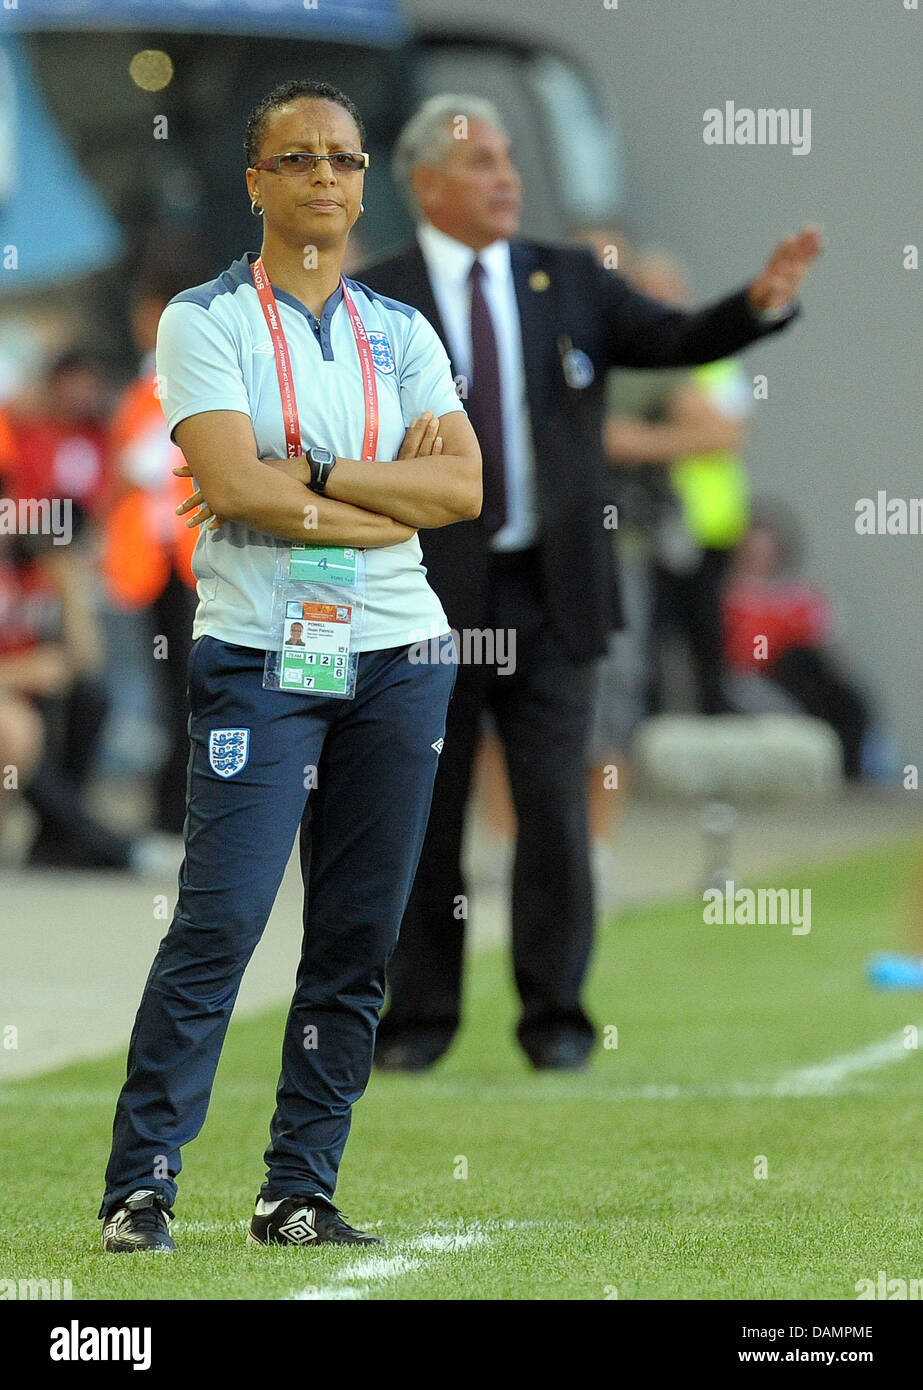 England's coach Hope Powell (L) and head coach Leonardo Cuellar (R) gesture during the Group B match Mexico against England of FIFA Women's World Cup soccer tournament at the Arena Im Allerpark in Wolfsburg, Germany, 27 June 2011. Foto: Peter Steffen dpa/lni  +++(c) dpa - Bildfunk+++ Stock Photo